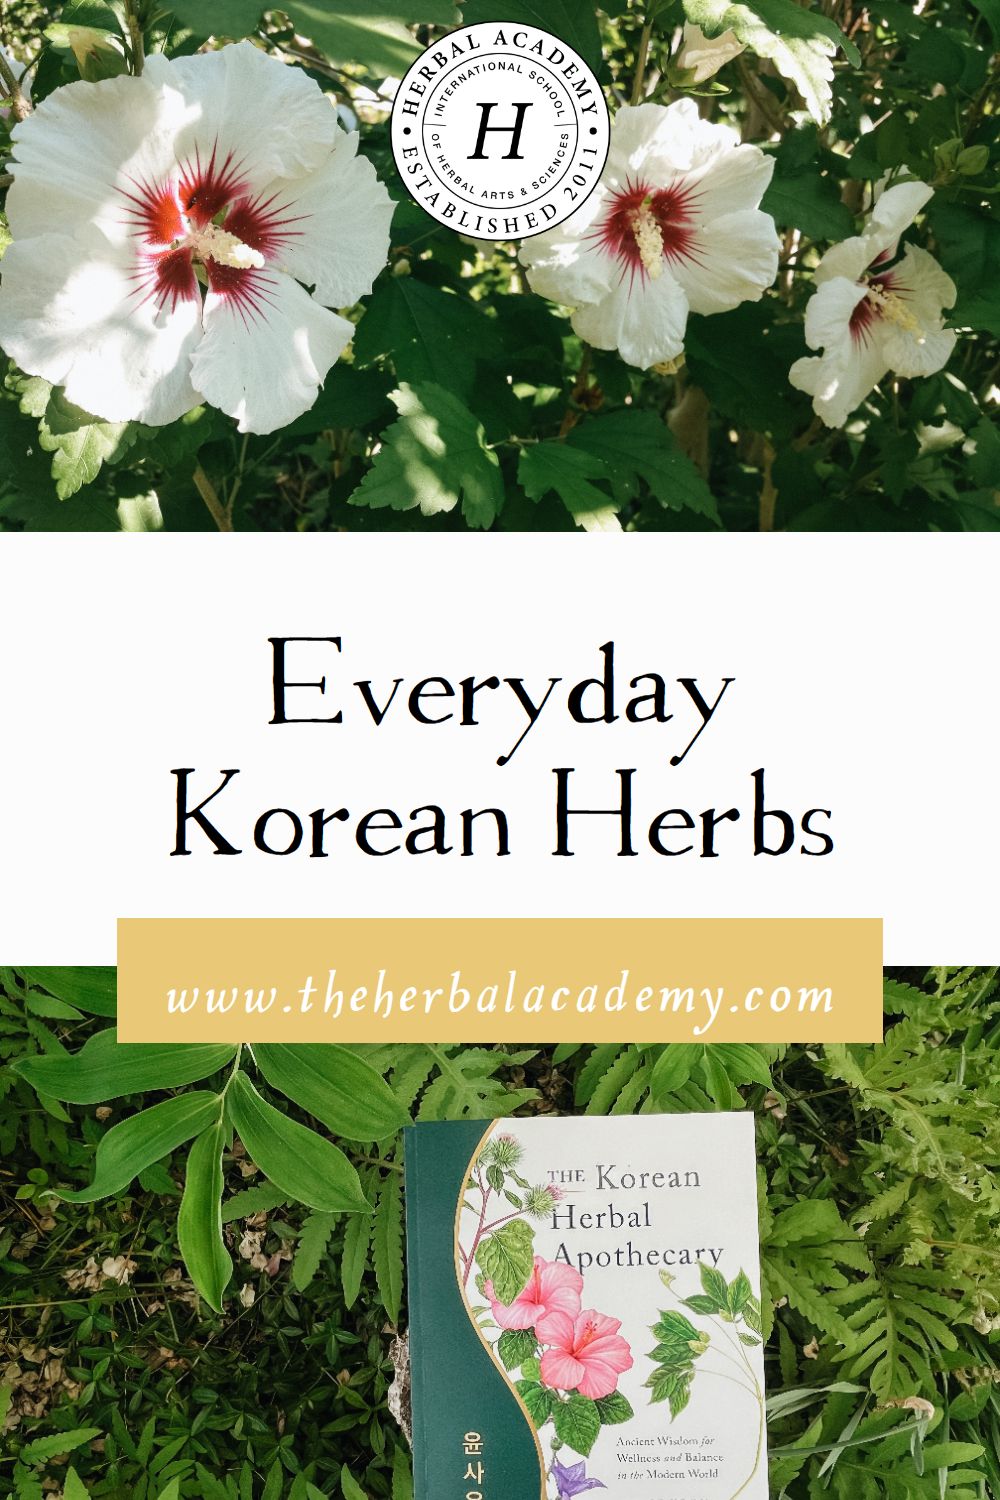 Everyday Korean Herbs | Herbal Academy | In Everyday Korean Herbs, herbalist Grace Yoon deep dives into the many different aspects of herbal traditions in Korea.